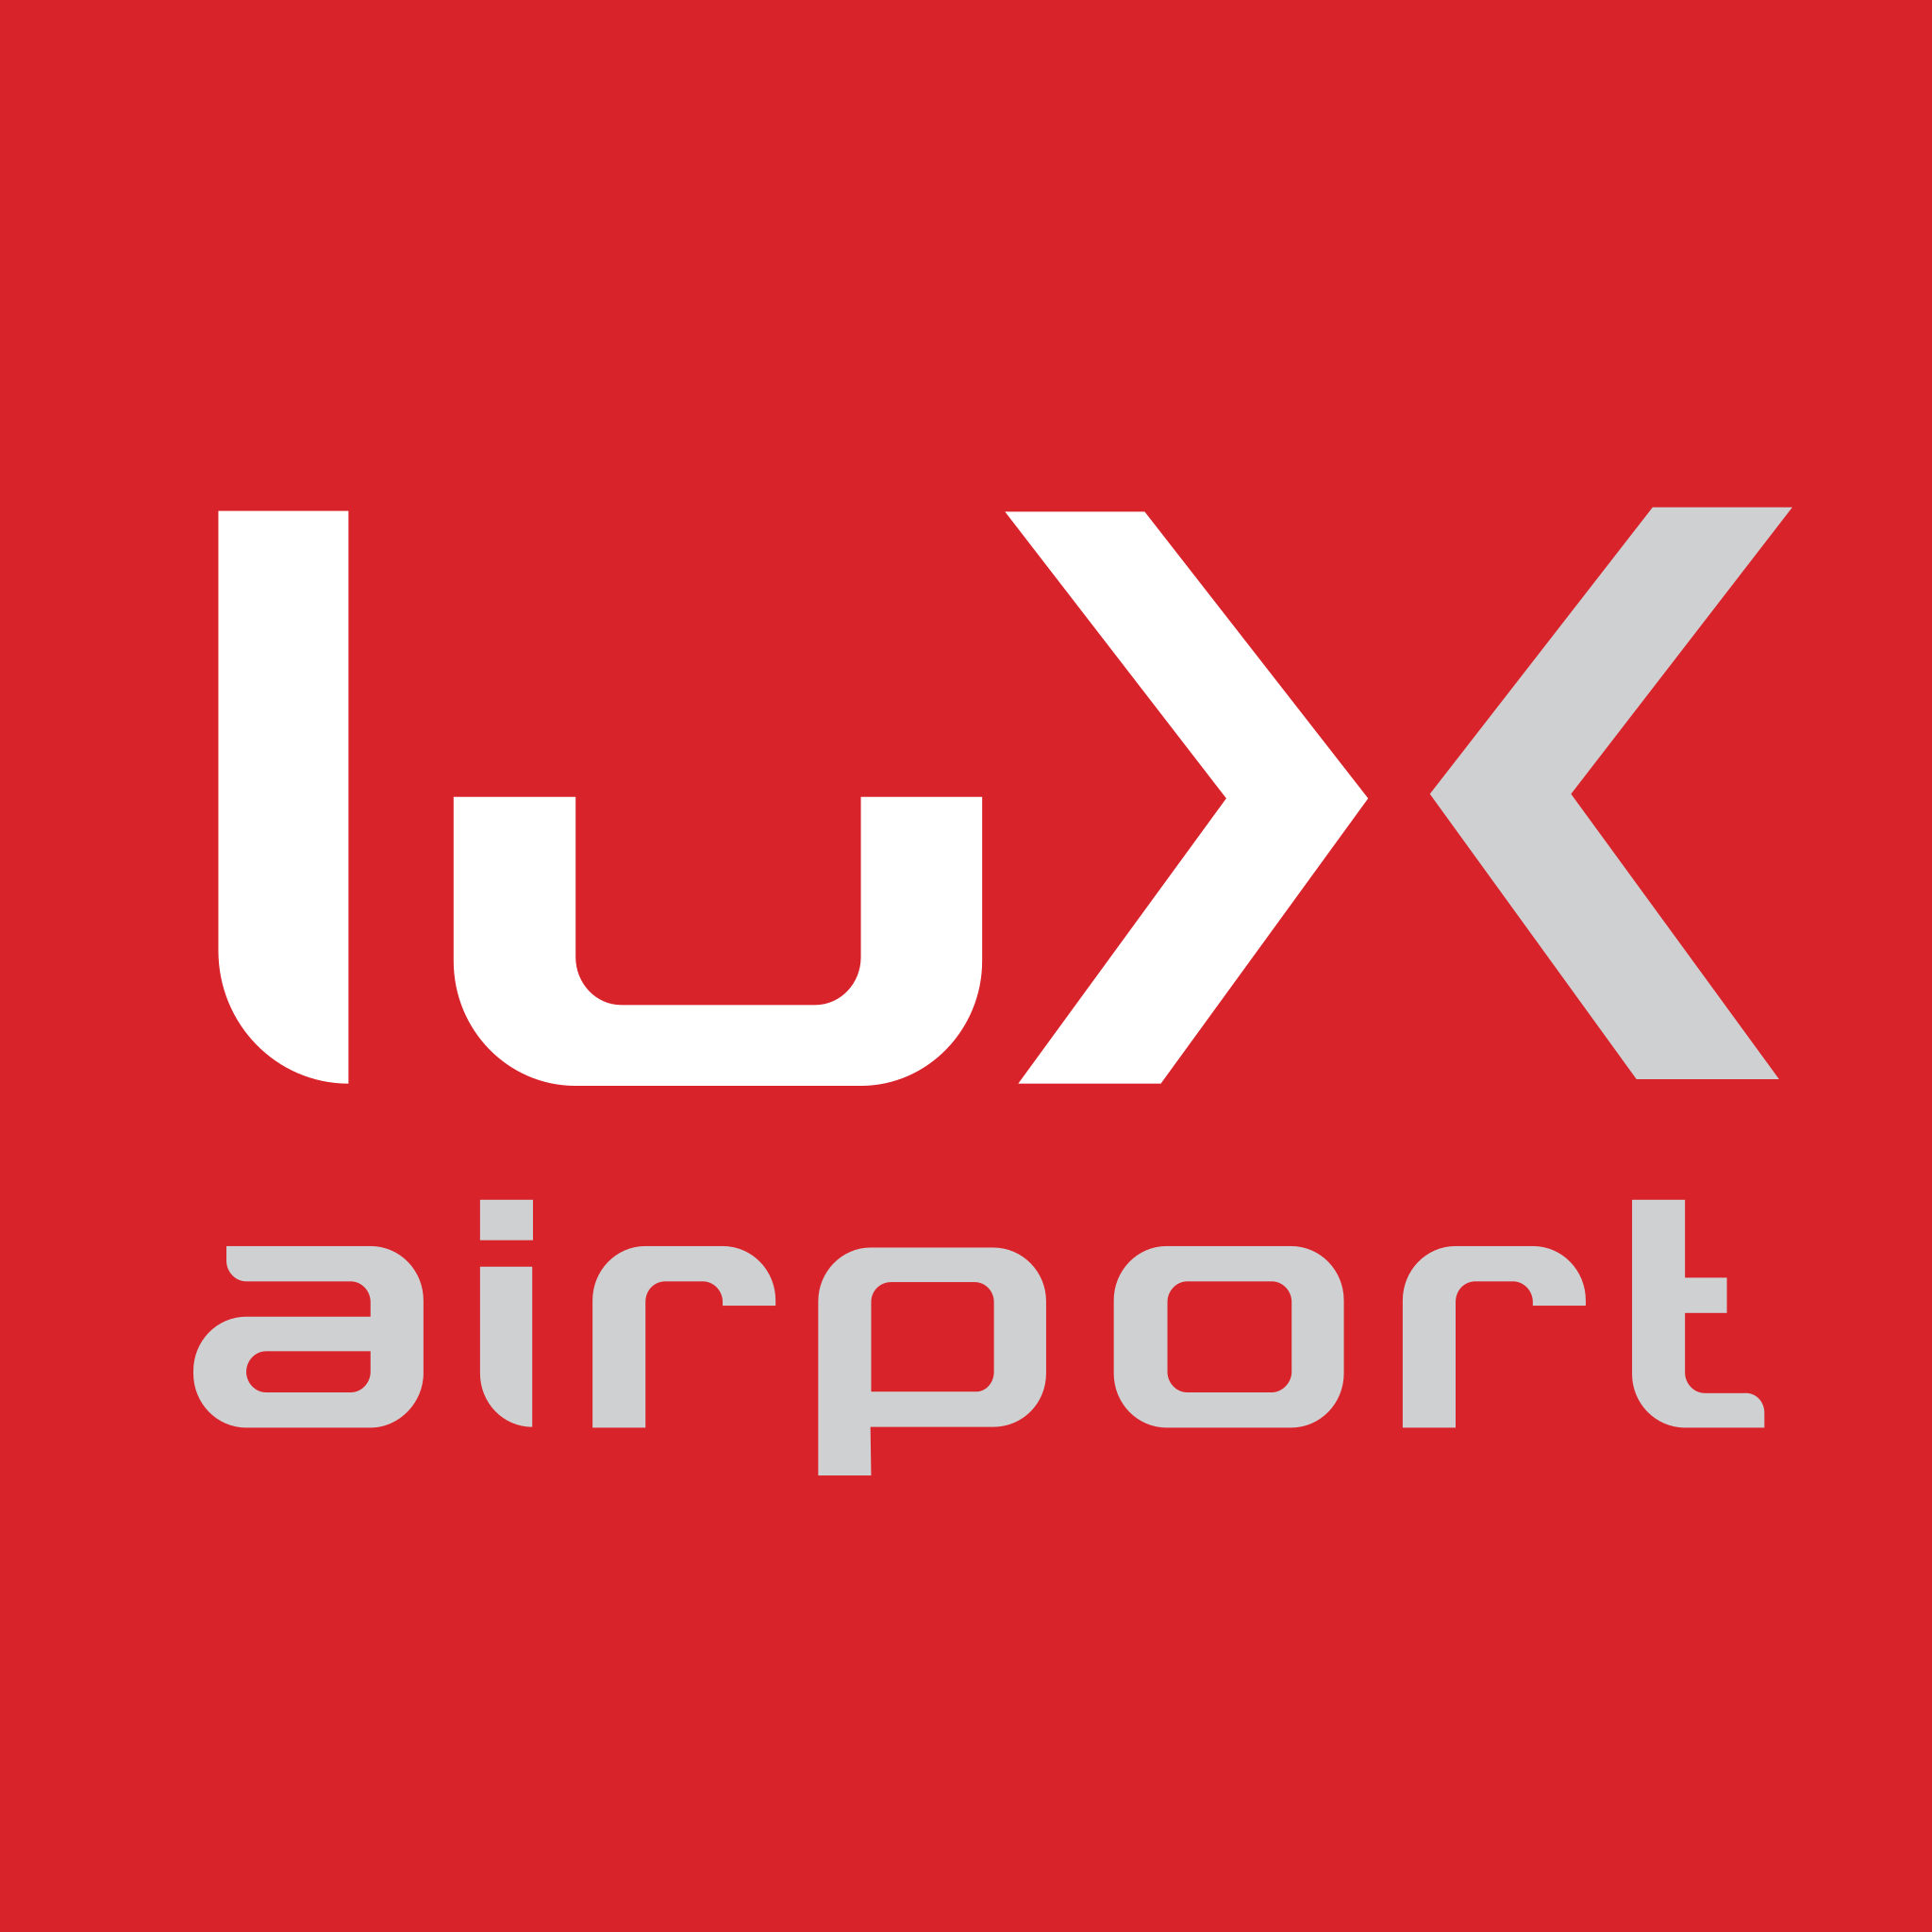 LUX_Airport_logo.svg